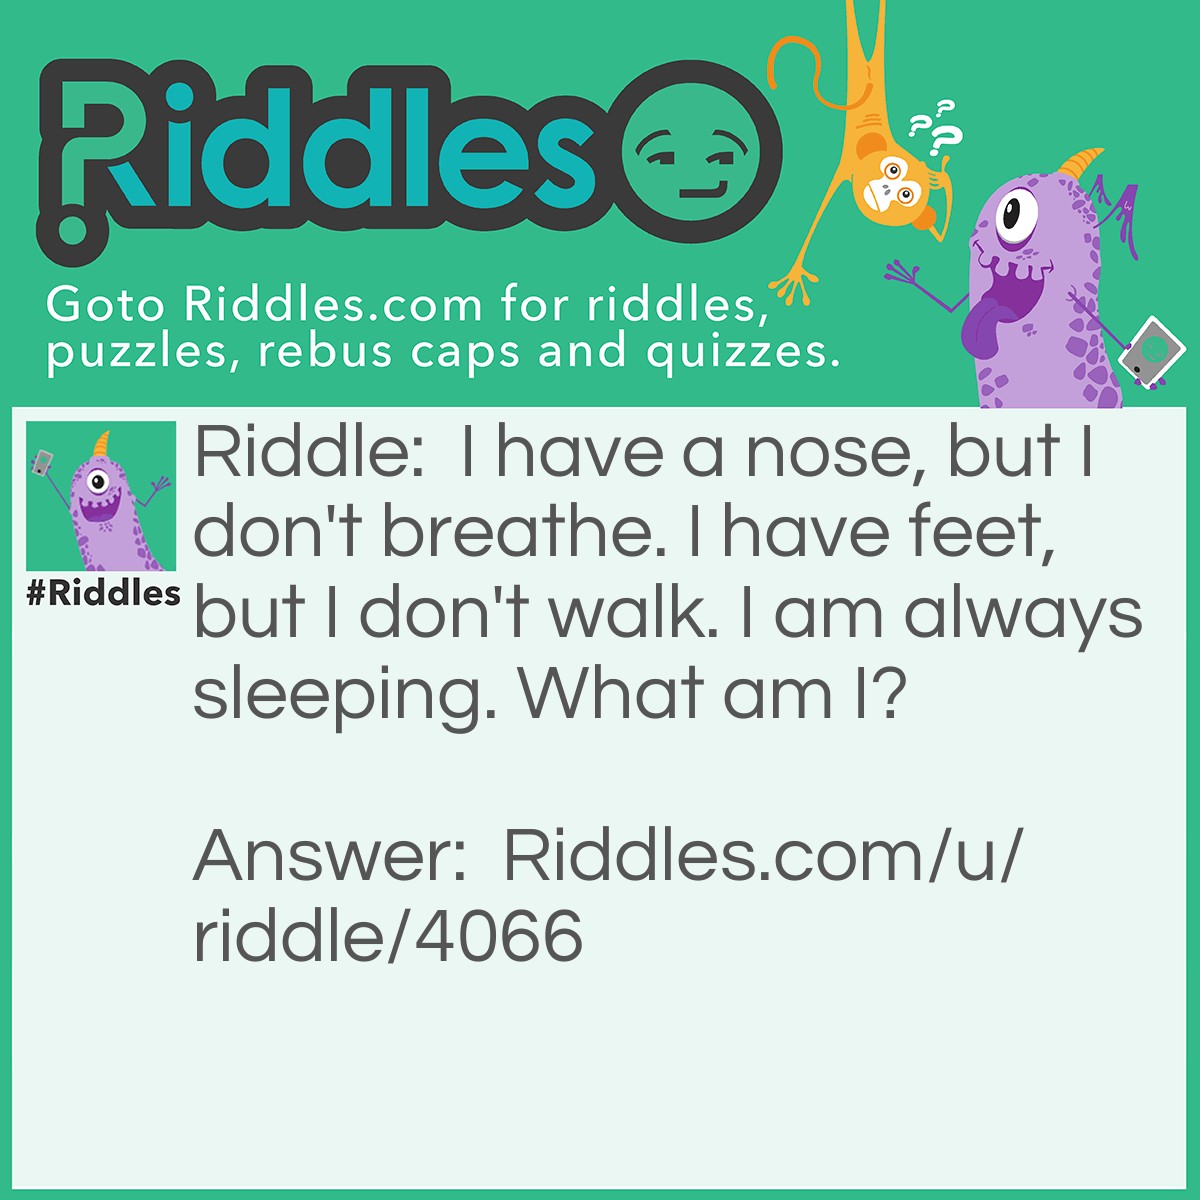 Riddle: I have a nose, but I don't breathe. I have feet, but I don't walk. I am always sleeping. What am I? Answer: A dead person.